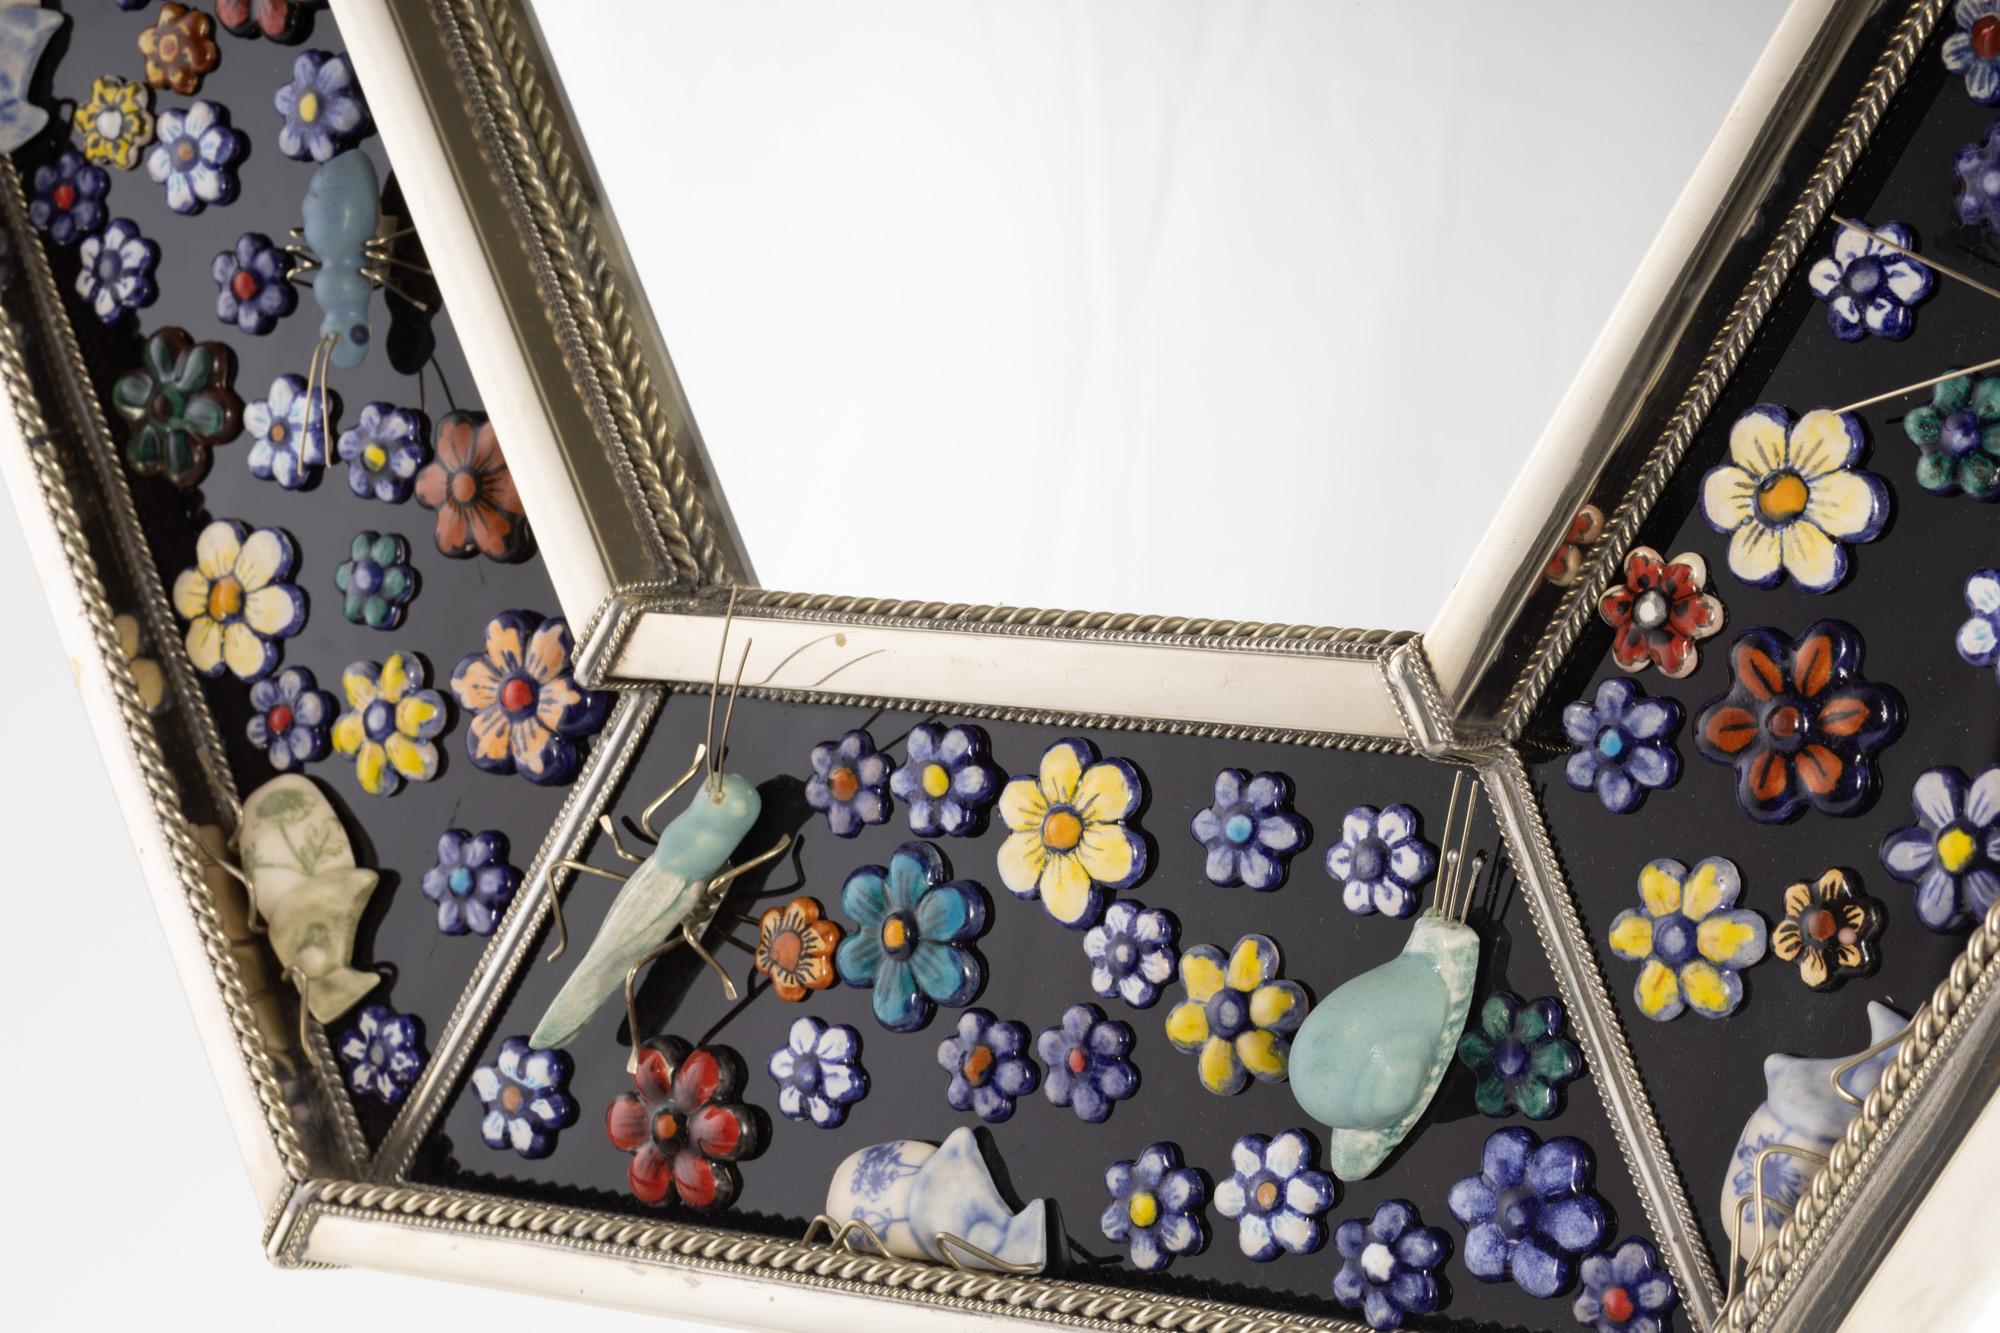 Other Hexagonal Mirror, Hand Painted Ceramic Flowers and Insects over White Metal